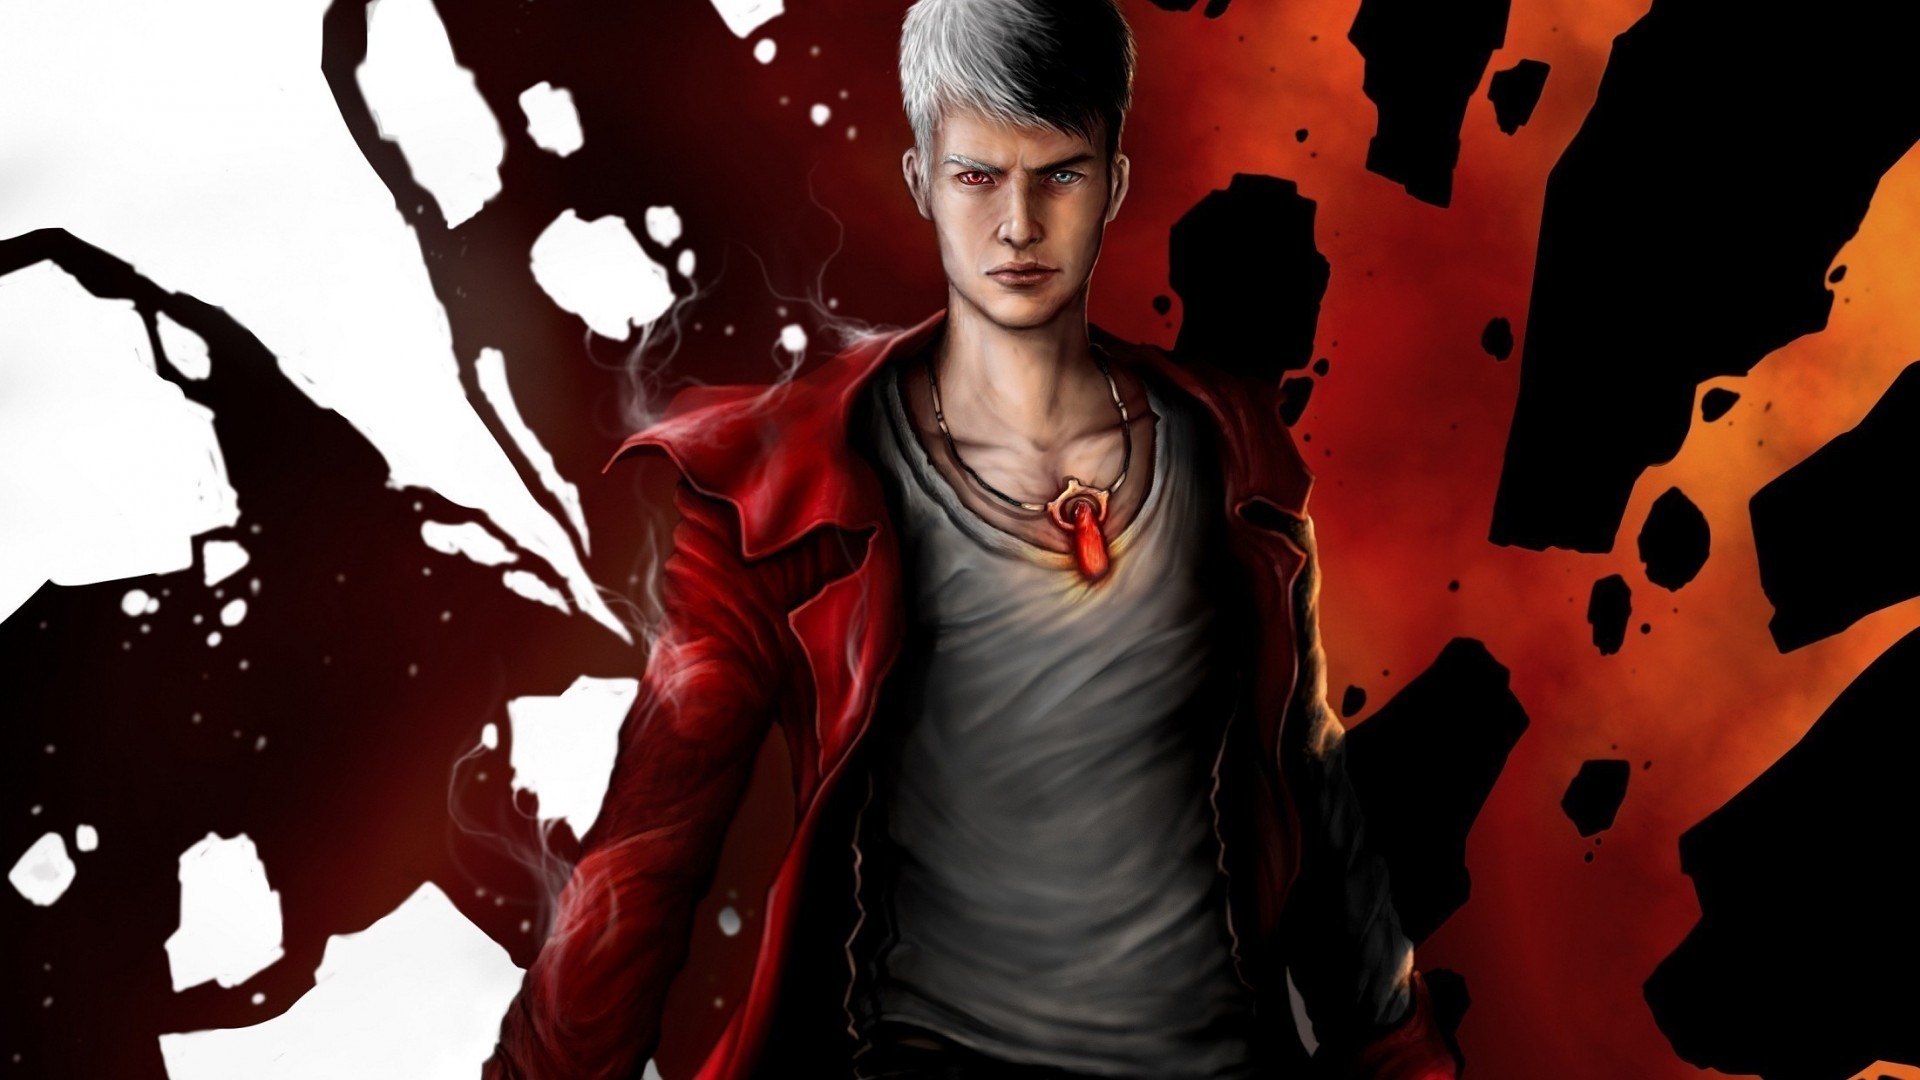 Dante from Devil May Cry for 1920 x 1080 HDTV 1080p resolution